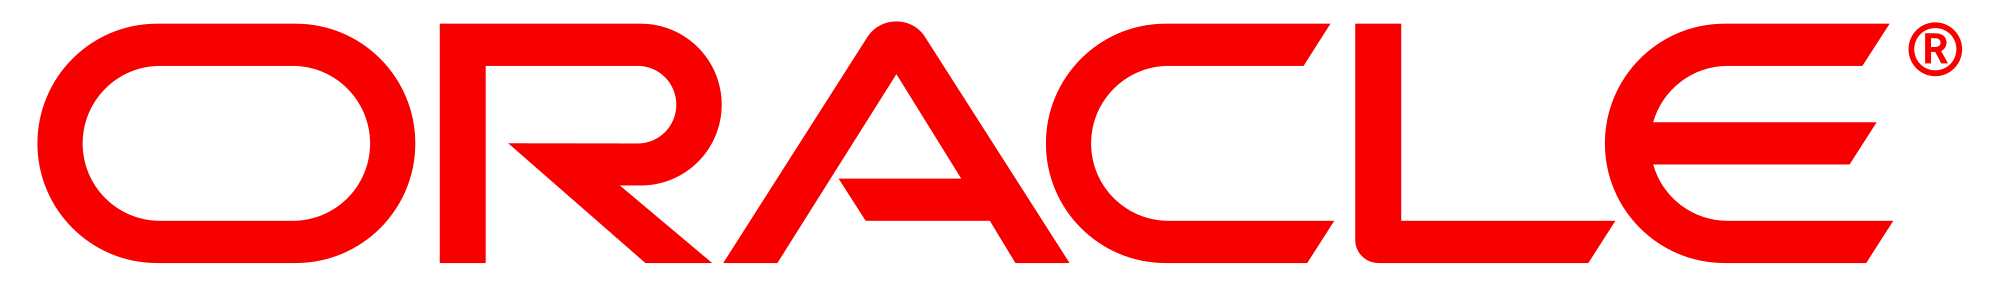 oracle-logo-triangle-text-symbol-trademark-transparent-png-2141040-min